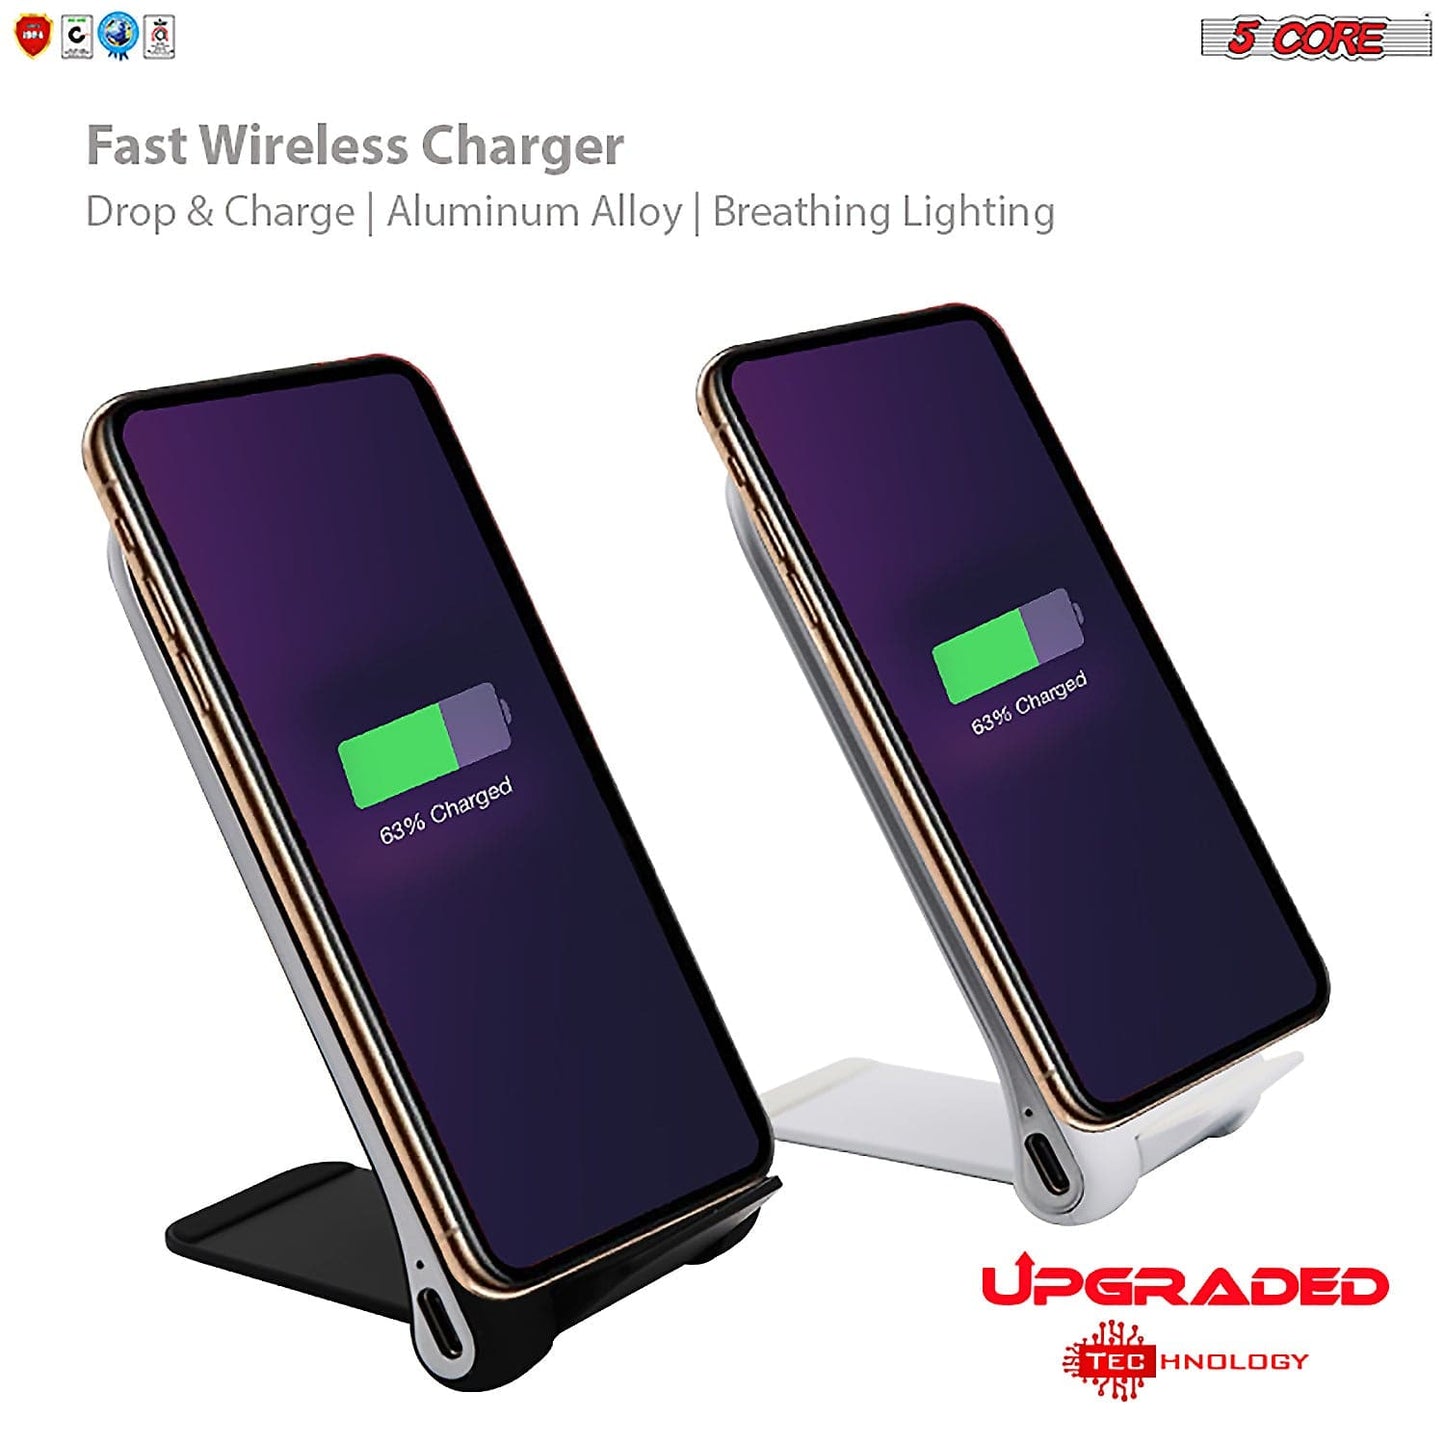 5 Core Fast Wireless Charger 2Pack Qi Certified 10W Wireless Charging